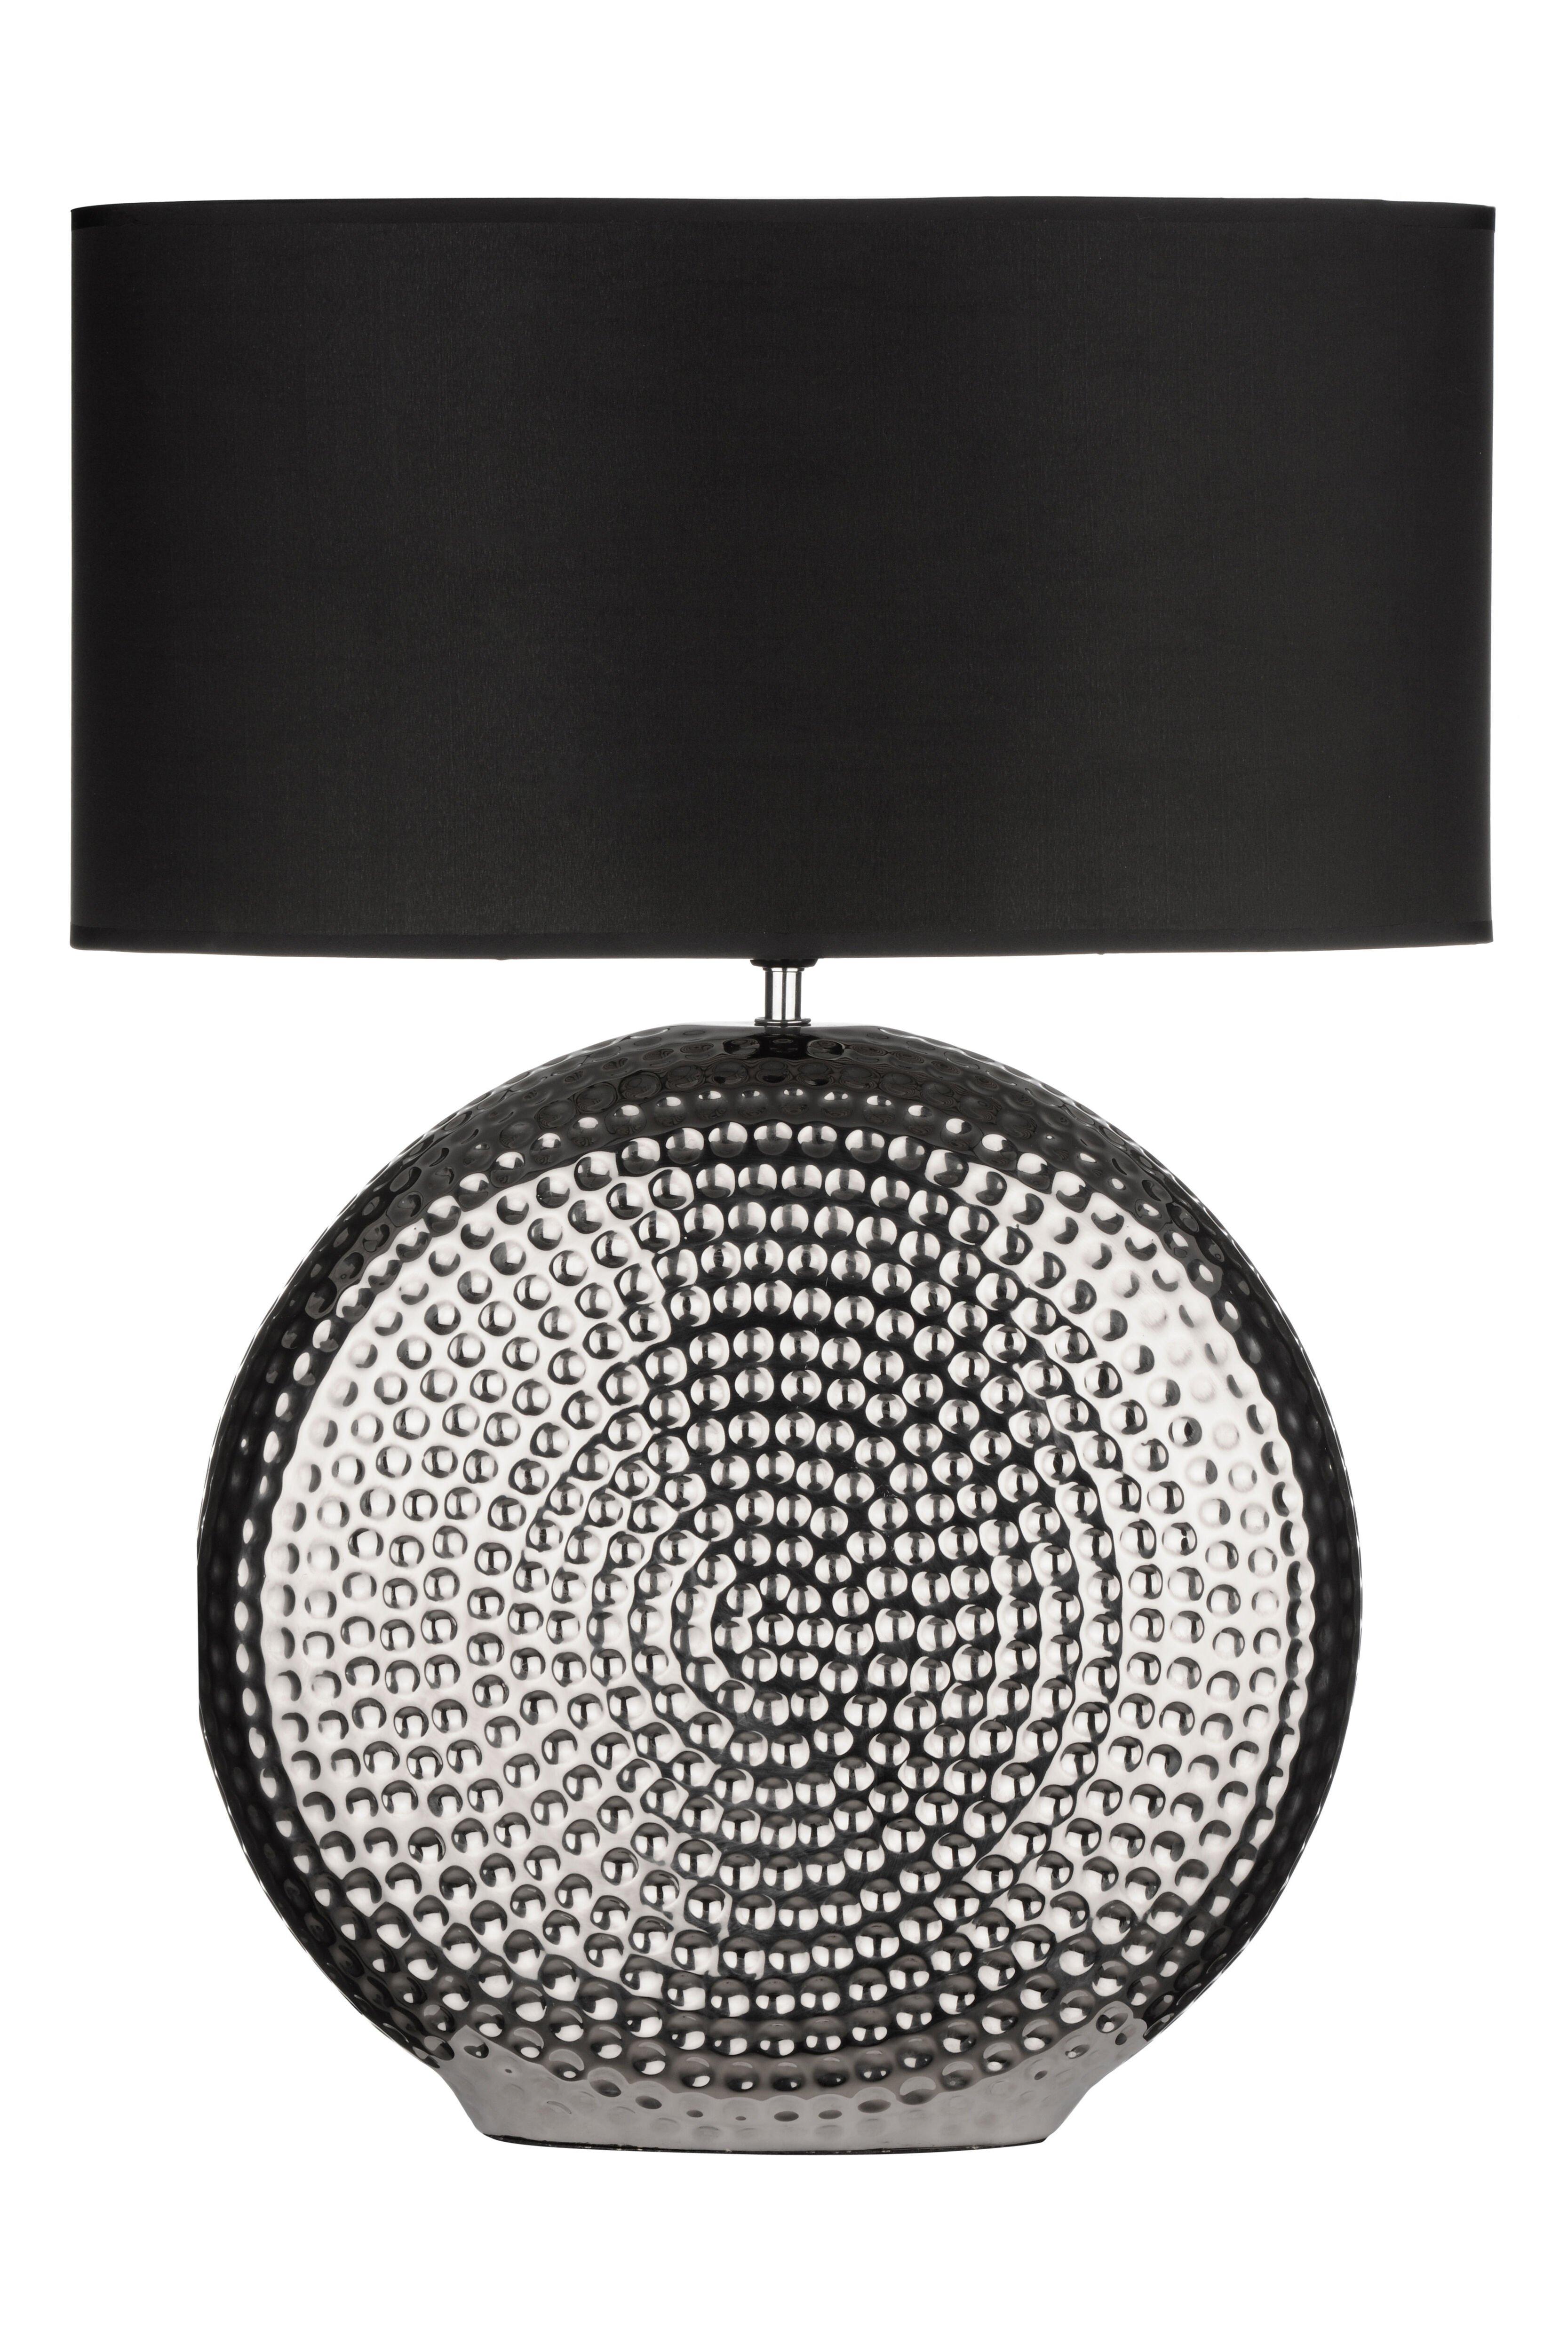 Interiors by Premier Small Hammered Chrome Finish Table Lamp